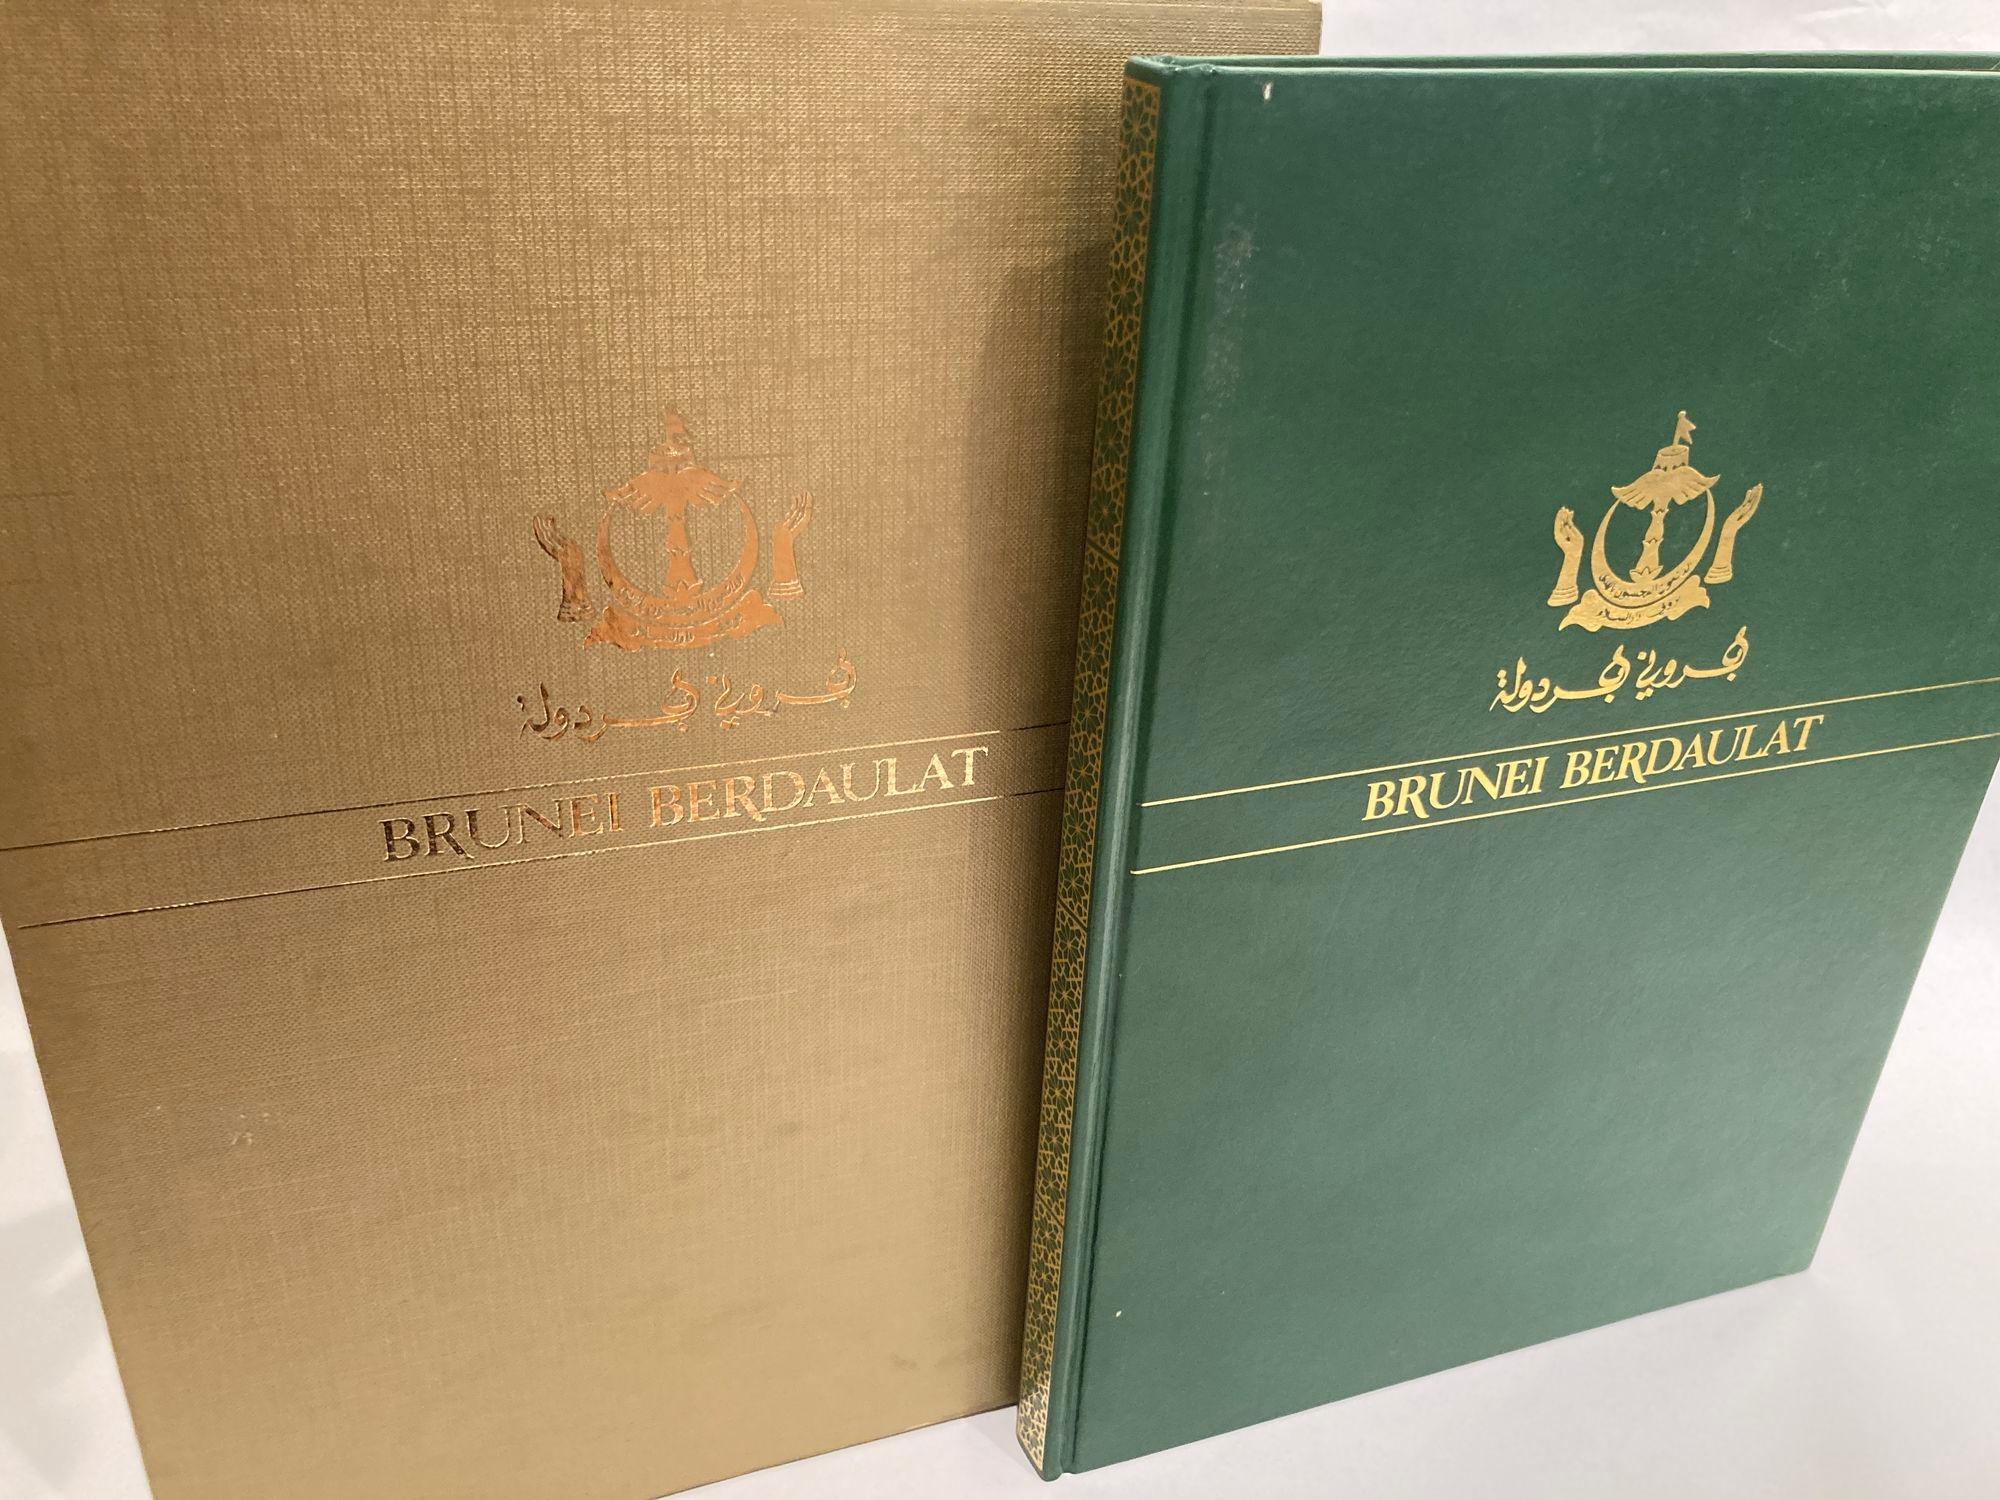 Brunei Berdaulat by Wee Beng Huat 1984. Hardcover book in sleeve.
Colour photographs throughout.
Publisher ? : ? Federal Publications for the Government of Brunei Darussalam (January 1, 1984)
Large format book with slipcase? : ? 142